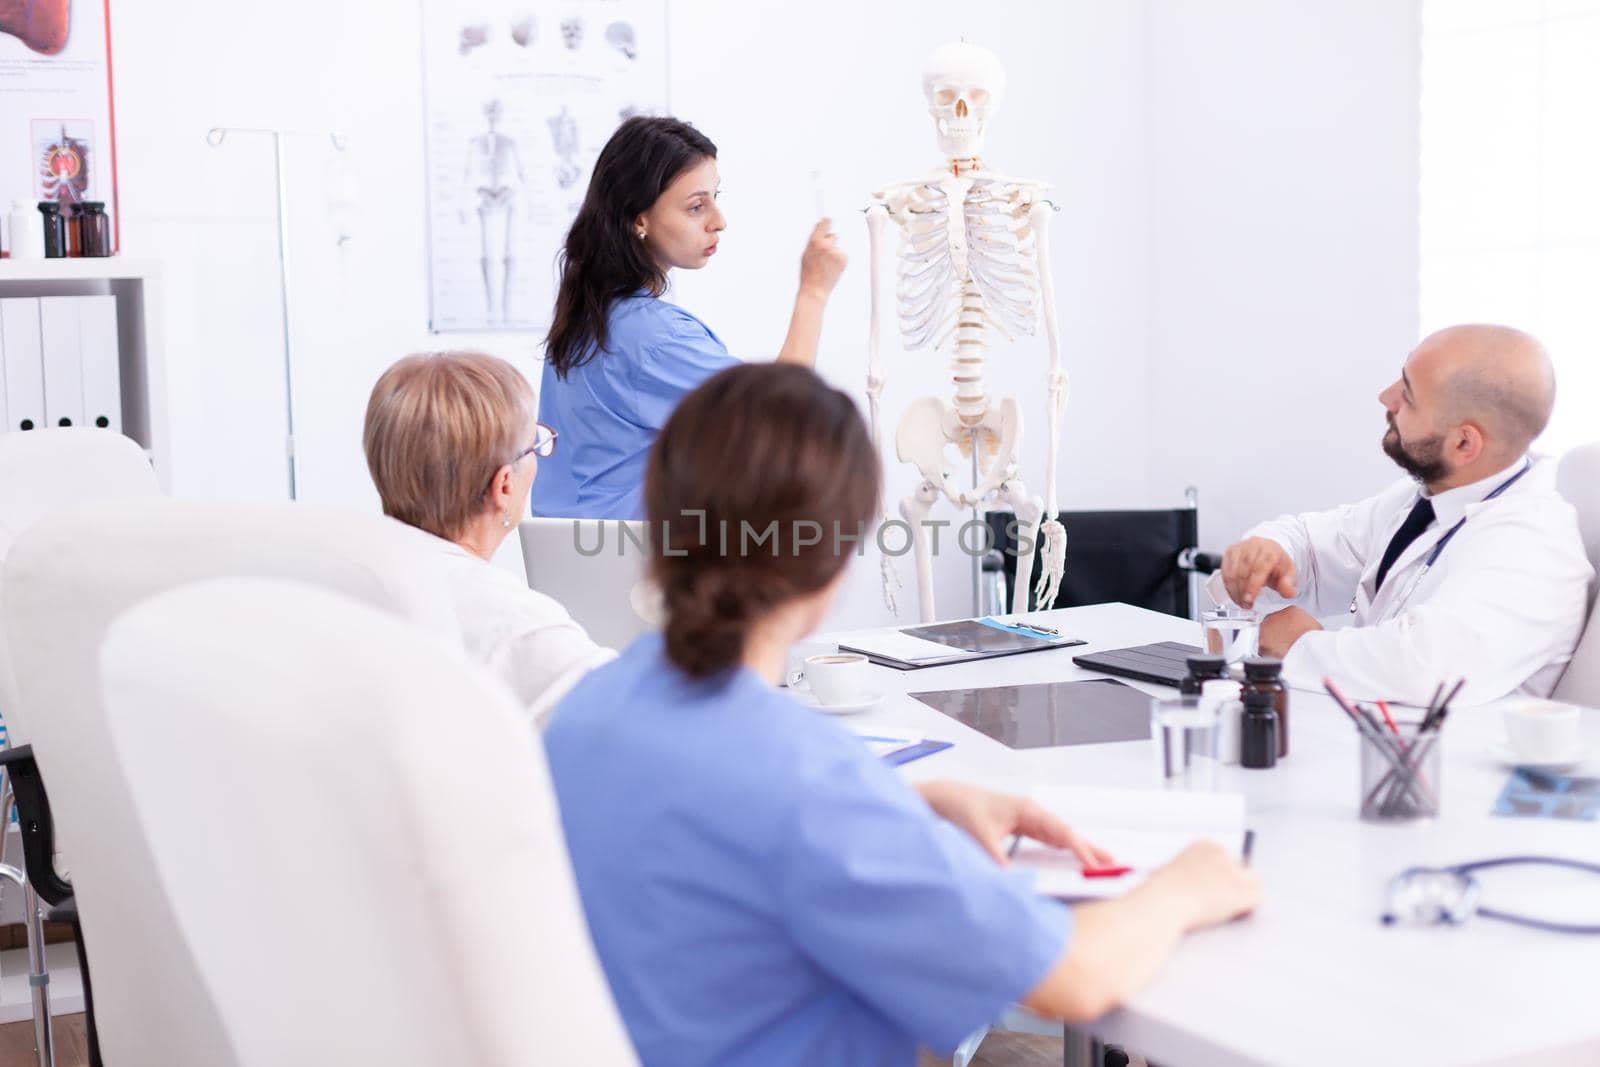 Nurse giving presentation in front of doctors team about human anatomy using skeleton. Clinic expert therapist talking with colleagues about disease, medicine professional.